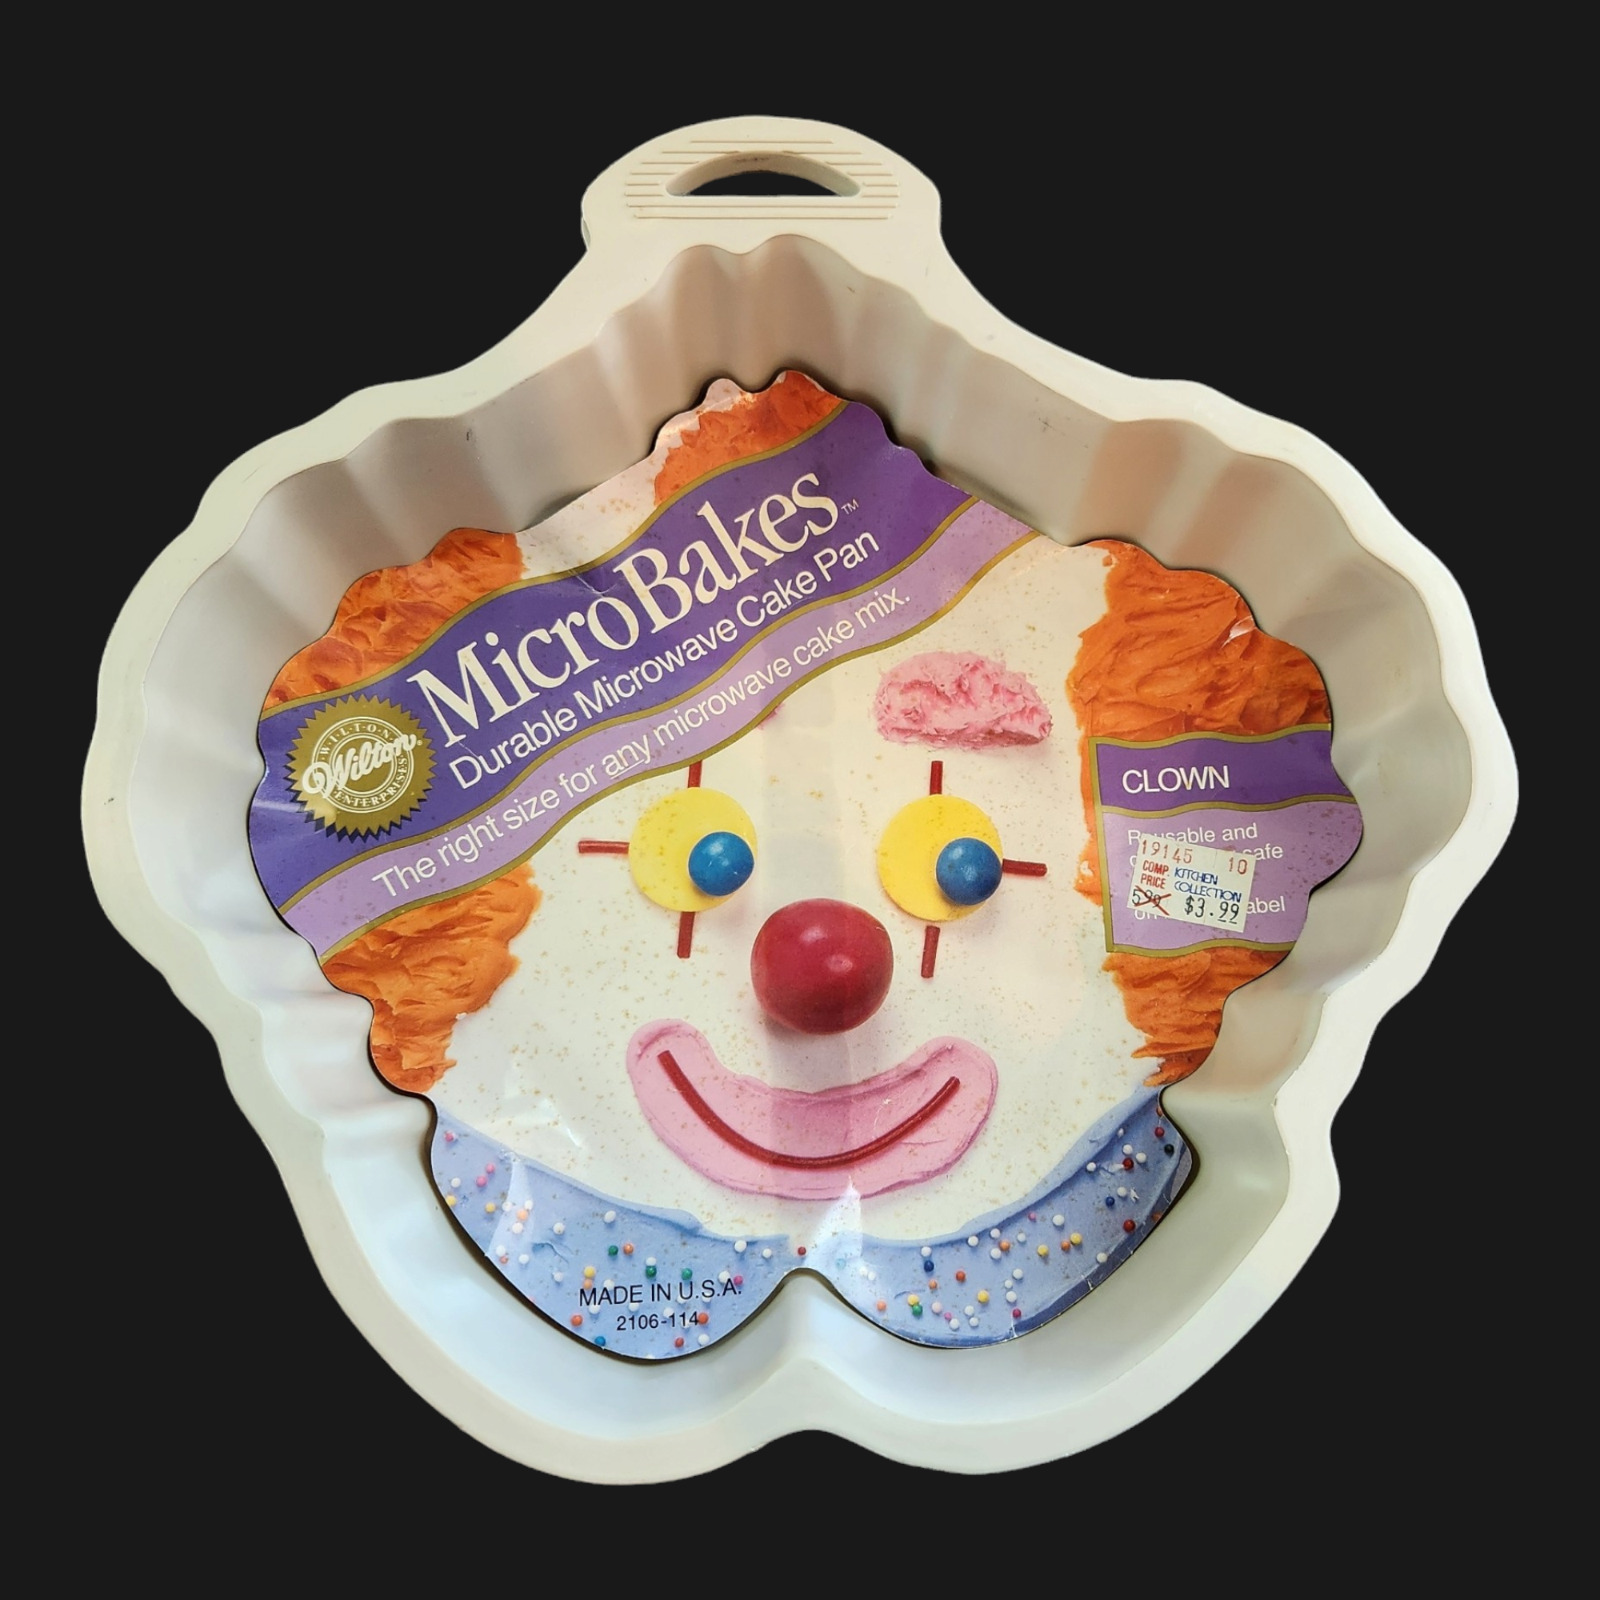 Wilton Micro Bakes Clown Durable Microwave Cake Mix Pan #2106-114 Made in USA